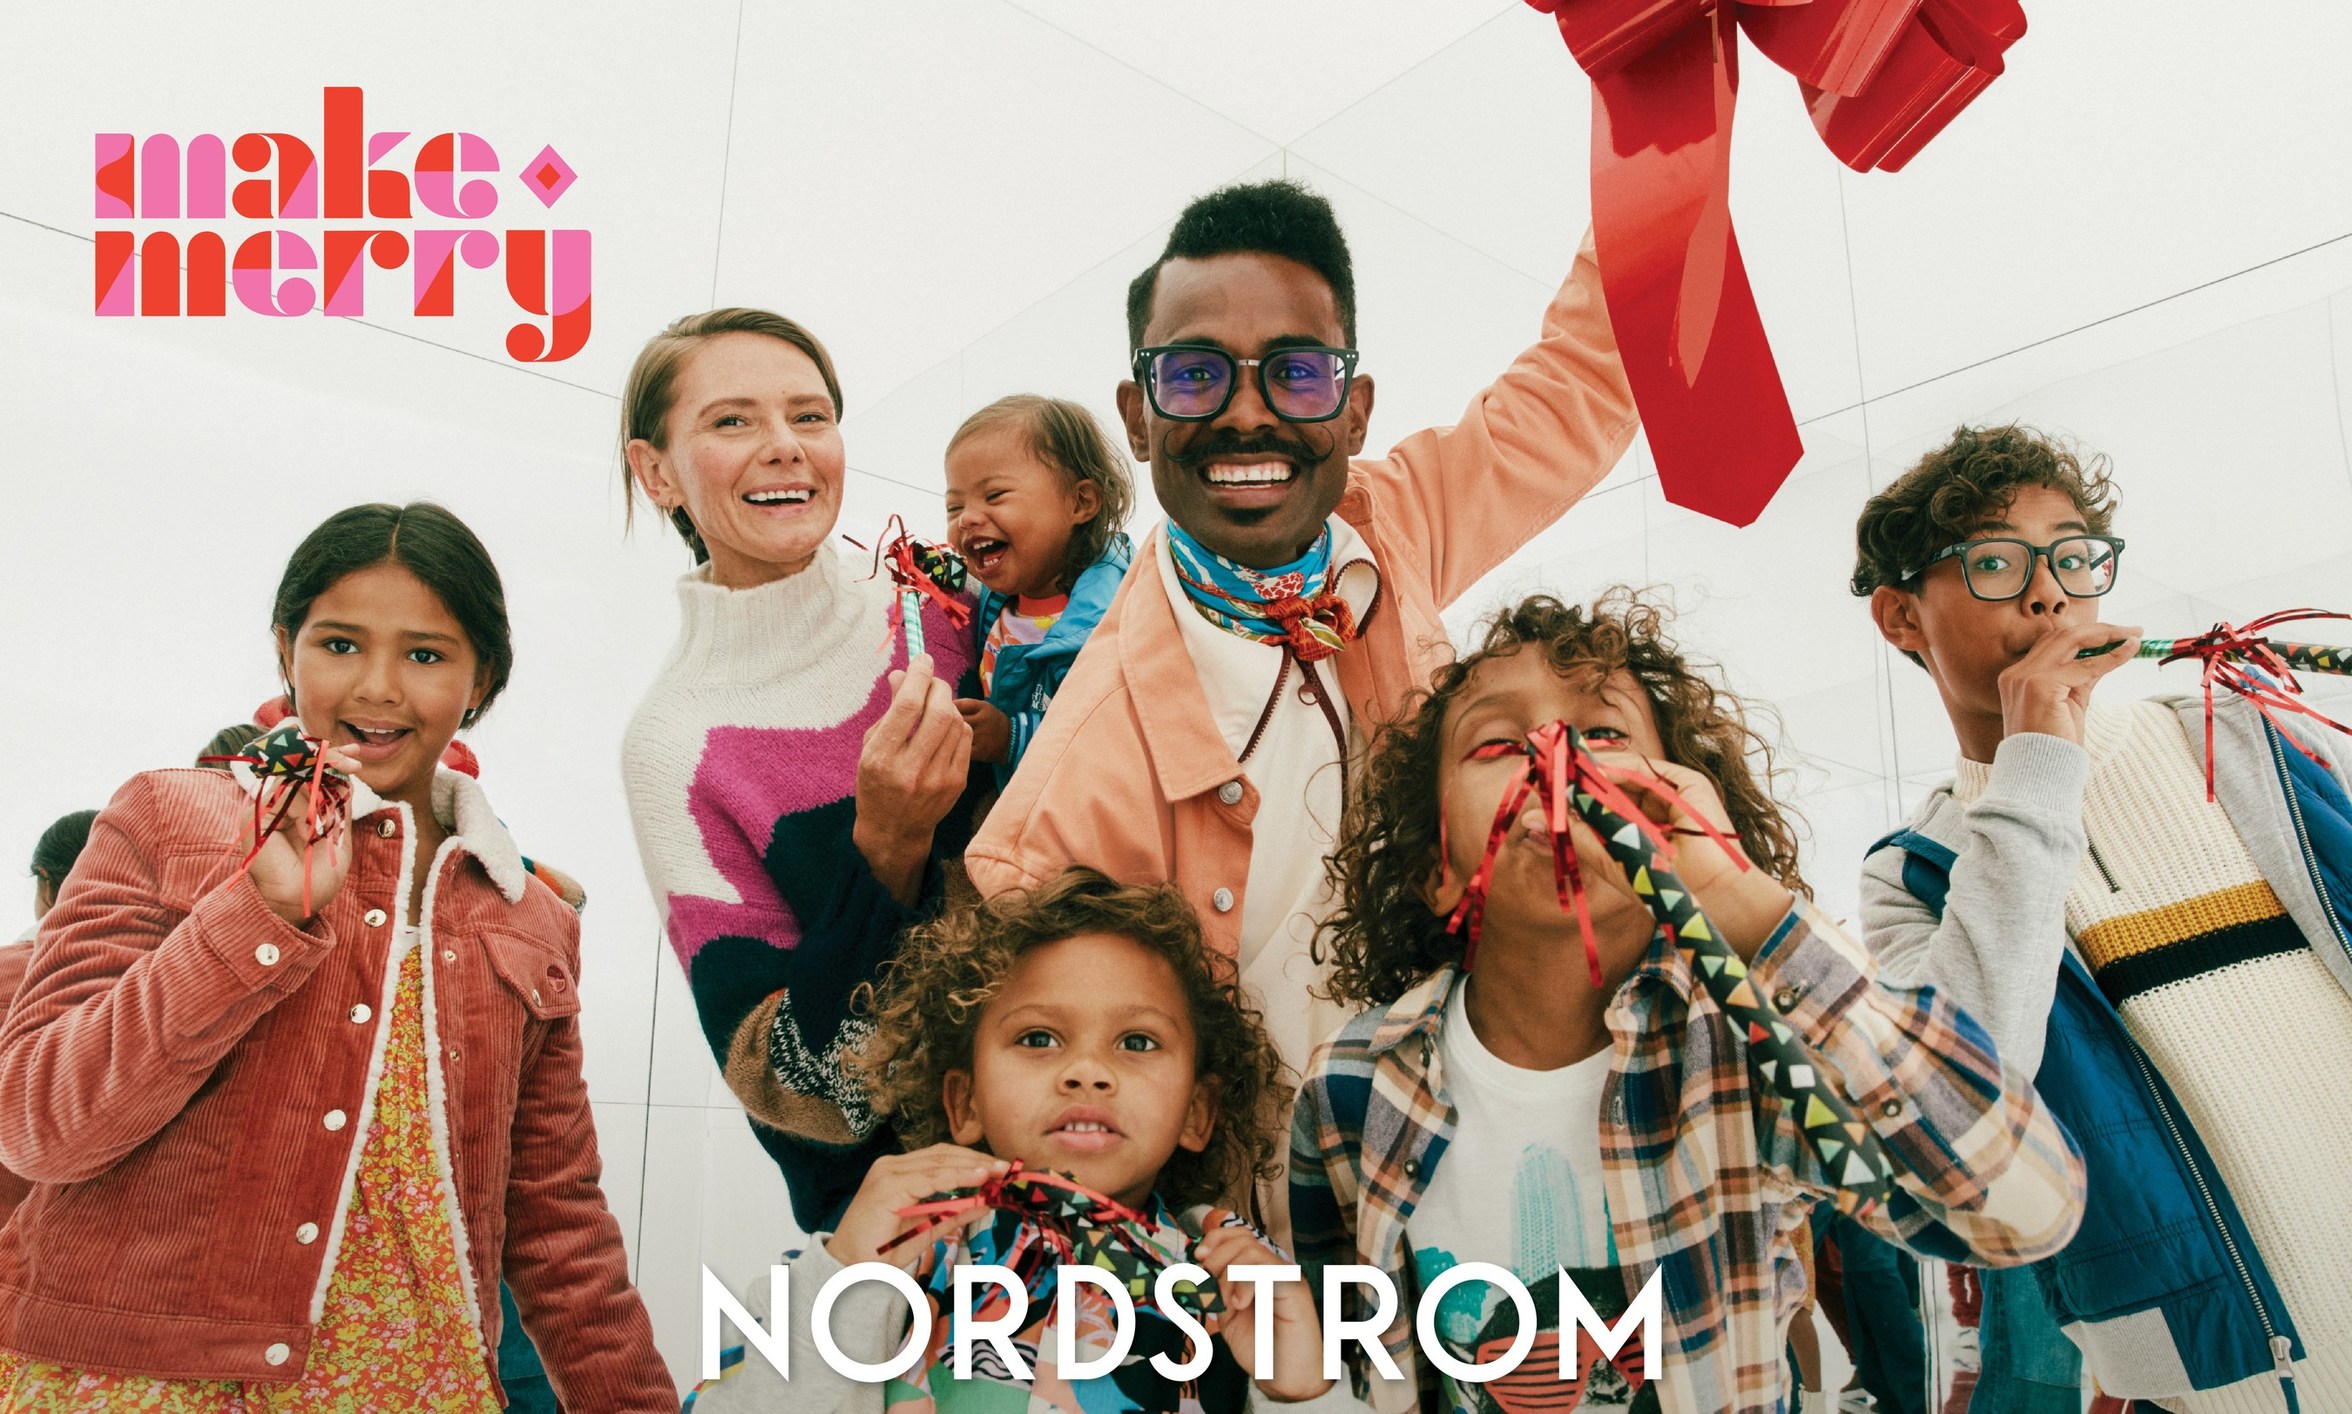 Nordstrom E-Commerce Analysis: Nordstrom Value Proposition